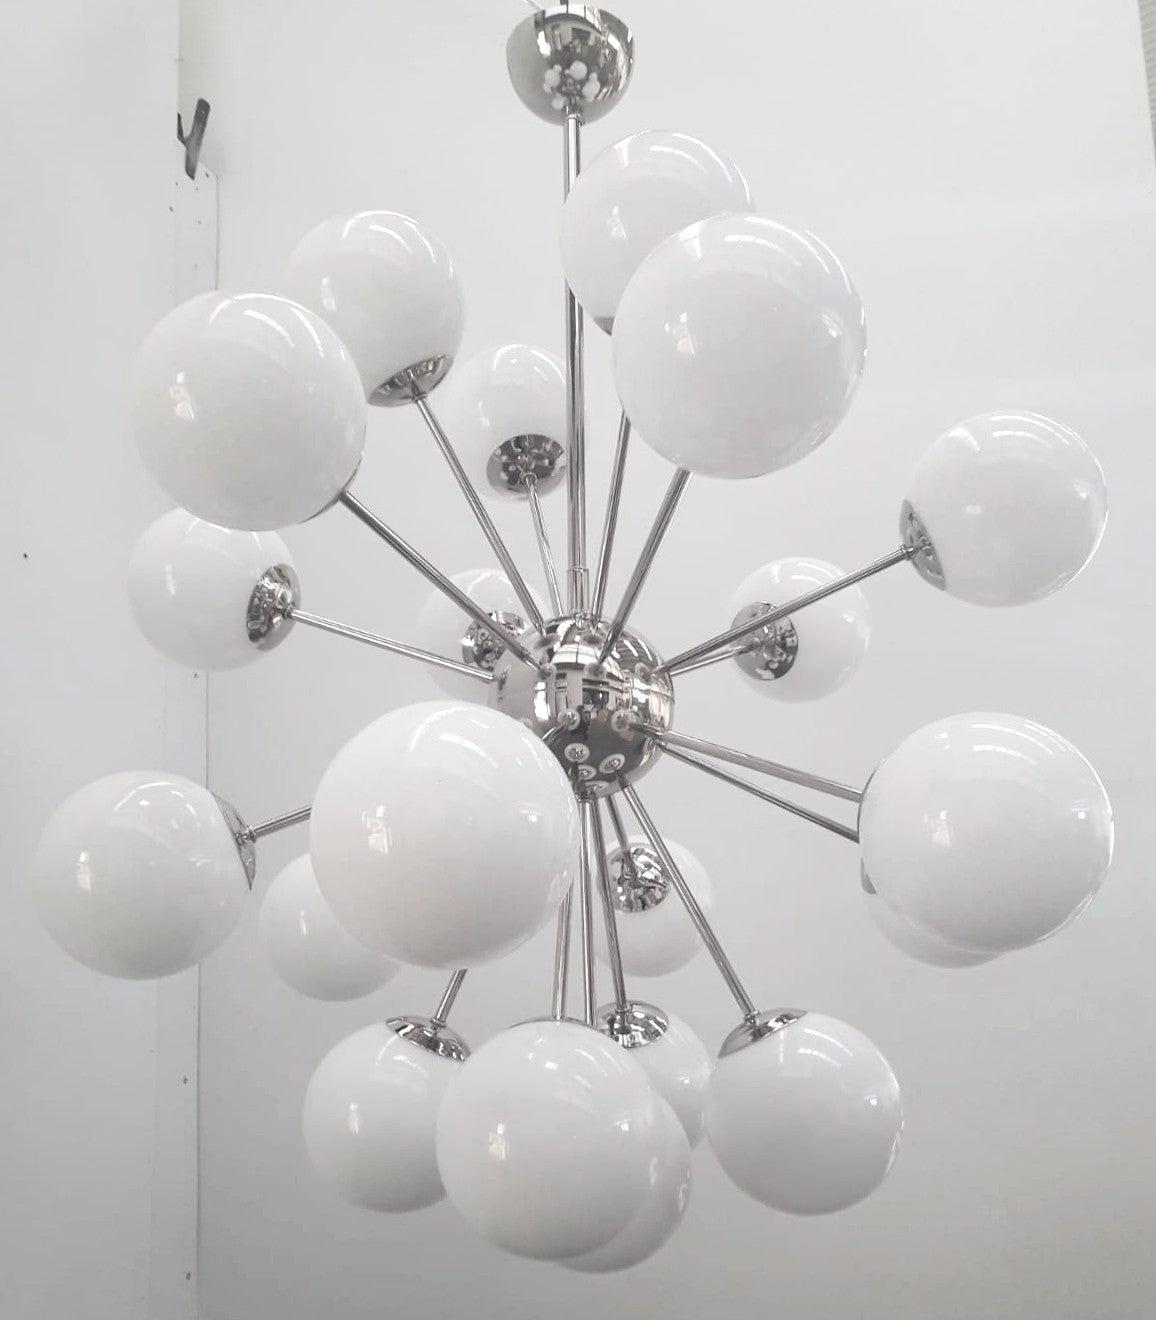 Italian sputnik chandelier with 21 Murano glass globes mounted on metal frame in polished nickel finish / Designed by Fabio Bergomi for Fabio Ltd / Made in Italy
21 lights / E12 or E14 type / max 40W each
Diameter: 36 inches / Height: 43 inches